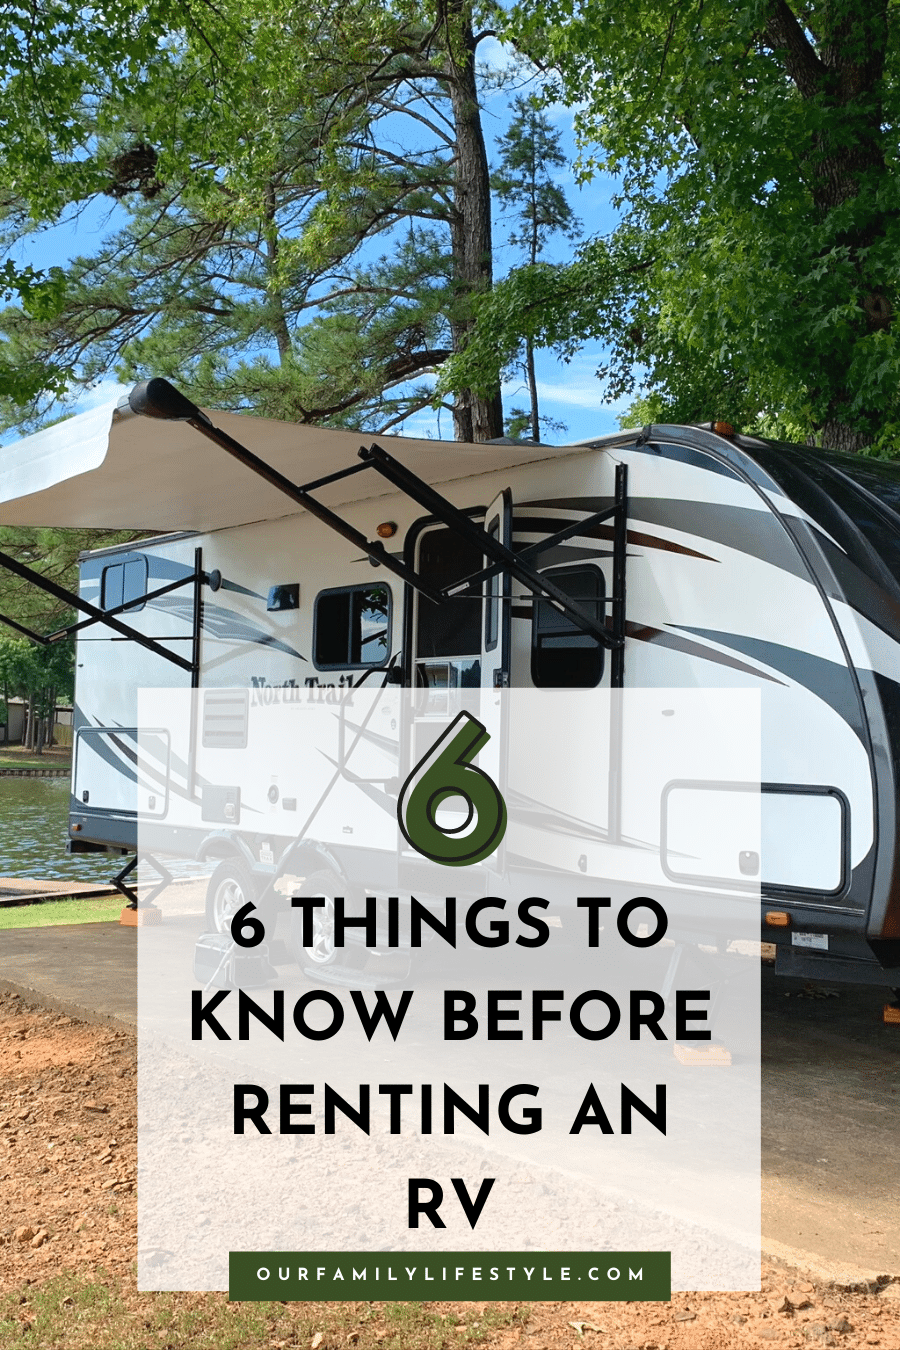 6 Things to Know Before Renting an RV